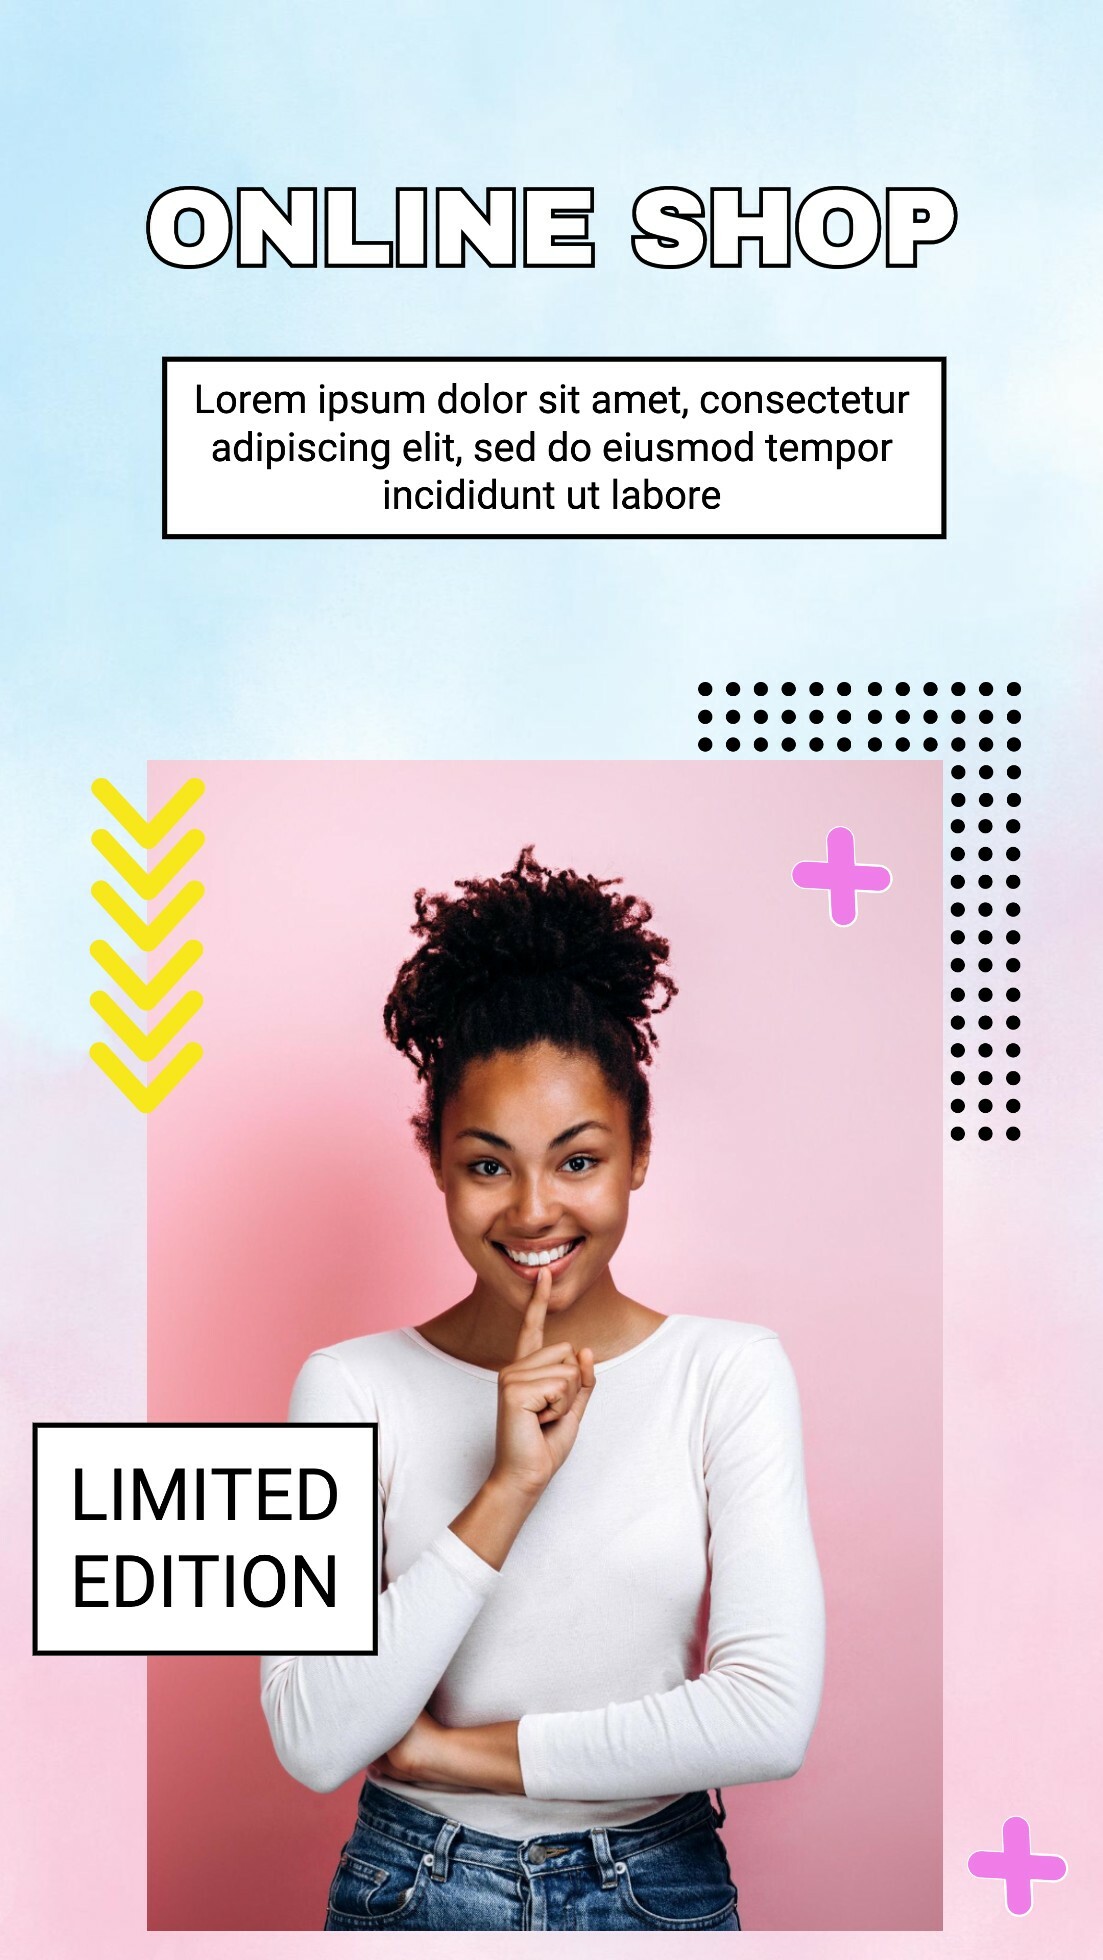 Online Shop Promo with Young Woman template